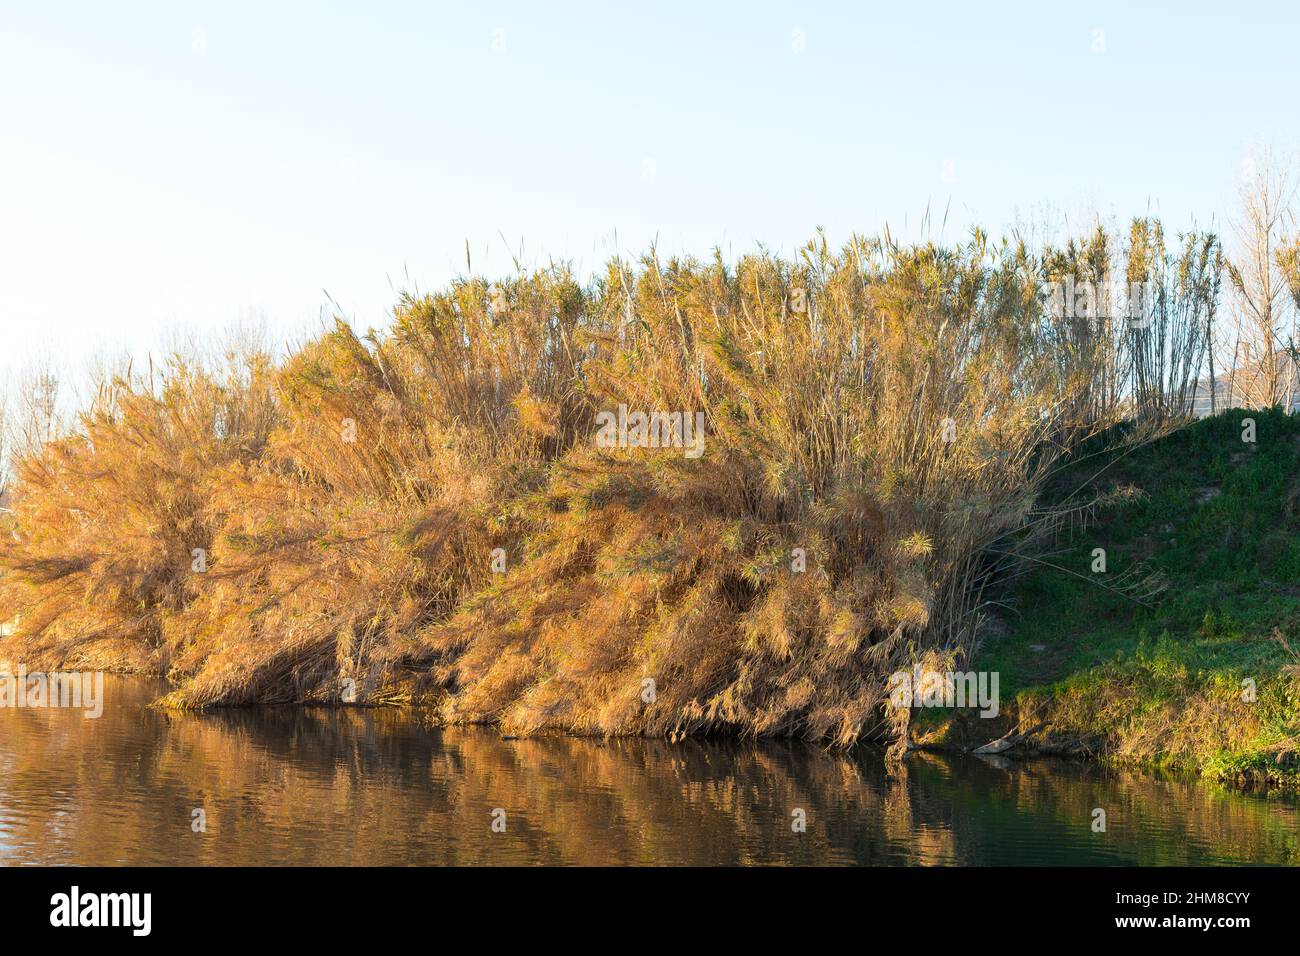 Reeds on the river banks in the Mediterranean basin Stock Photo